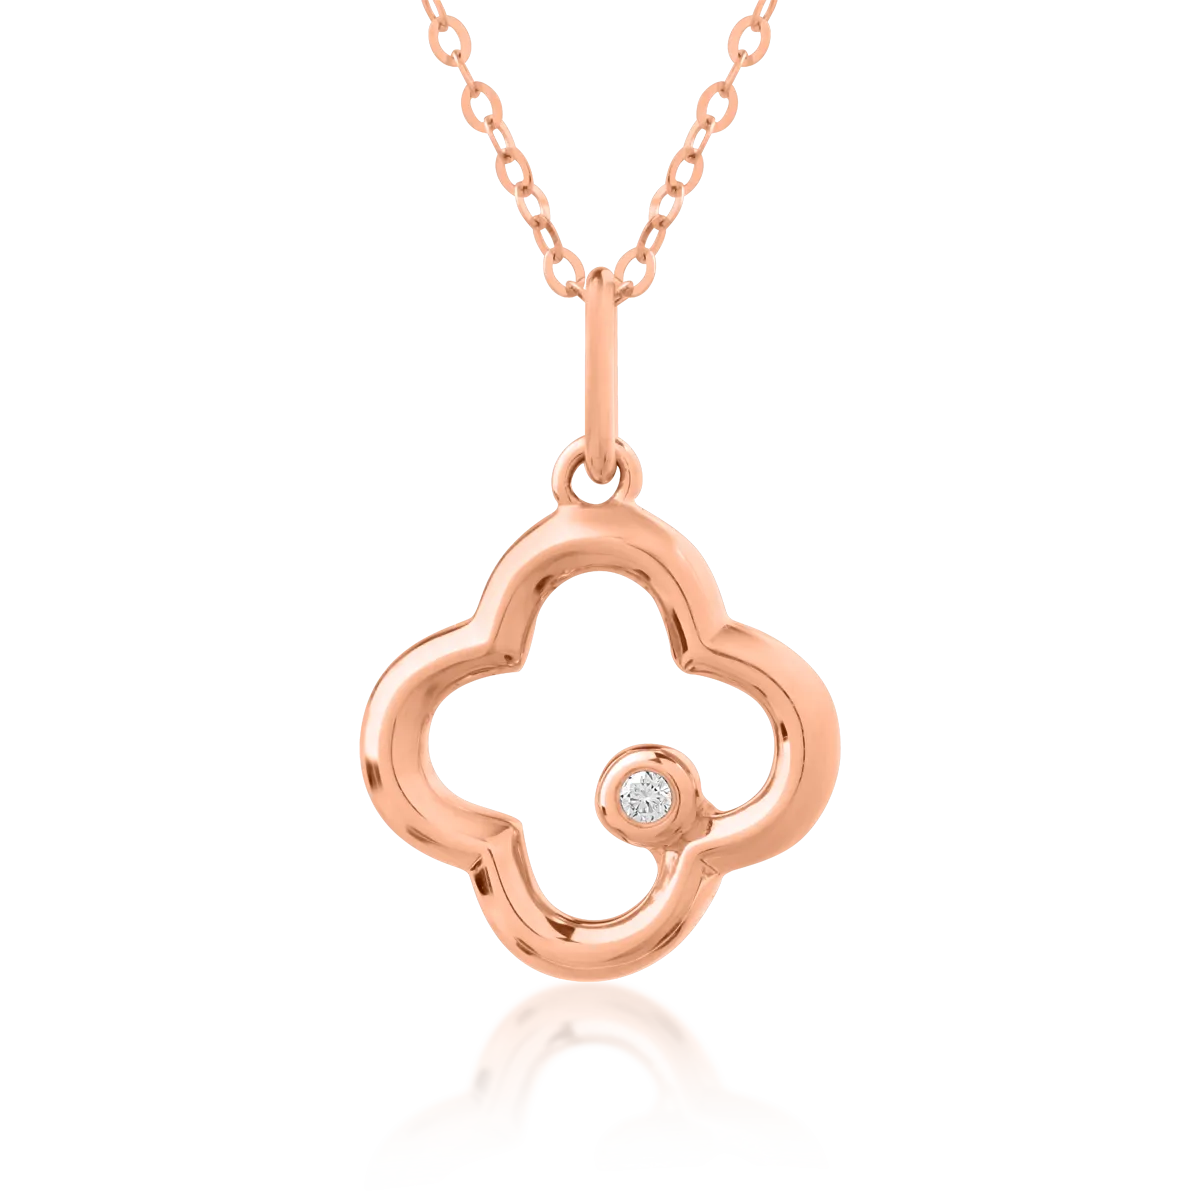 18K rose gold pendant necklace with 0.009ct diamond